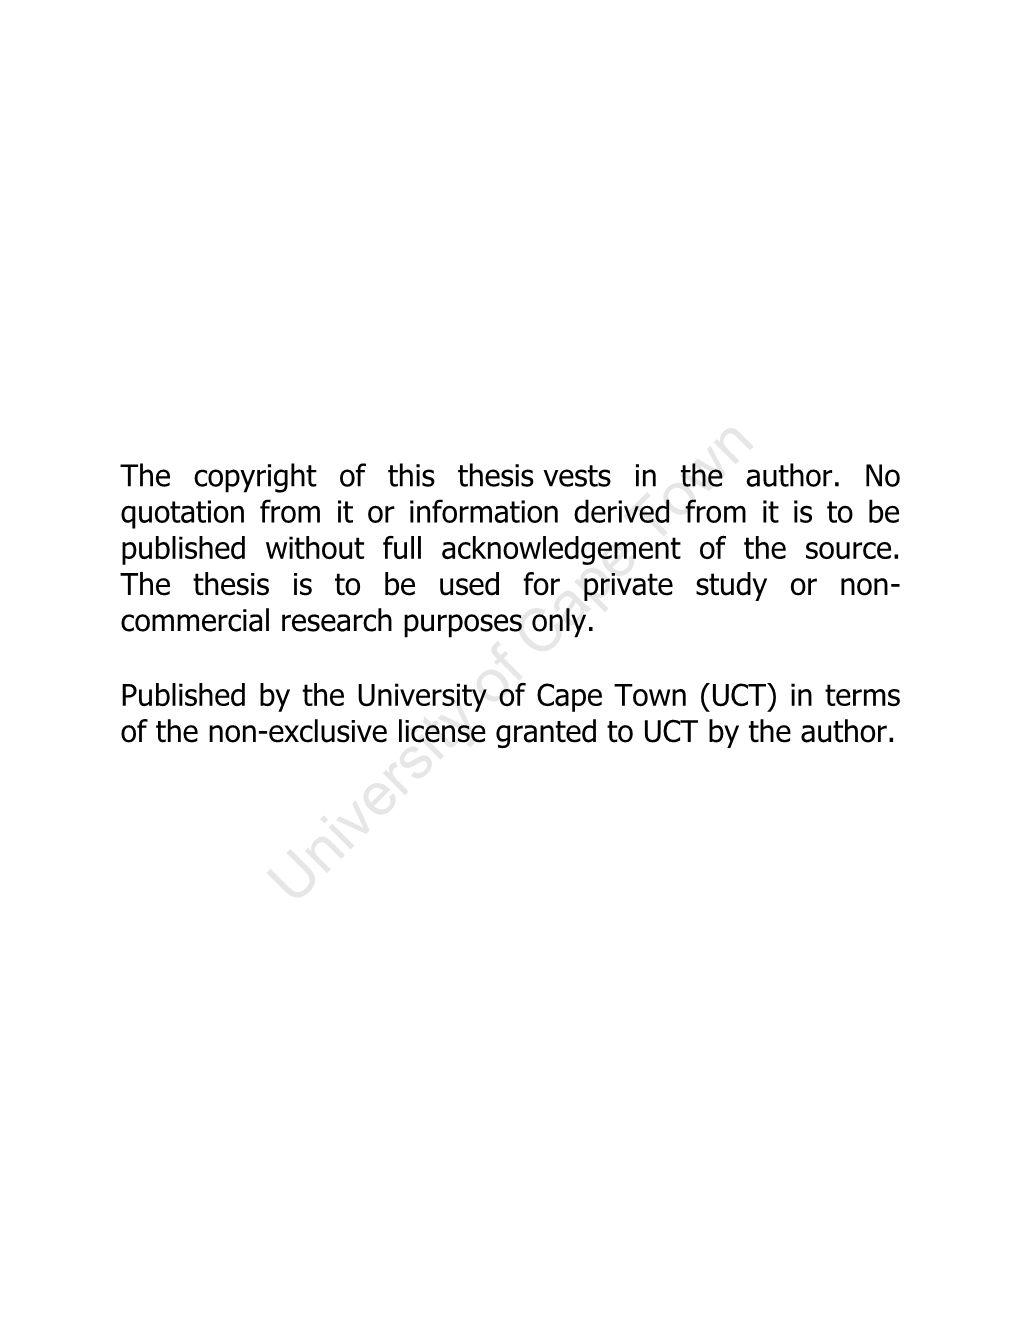 University of Cape Town and the National Research